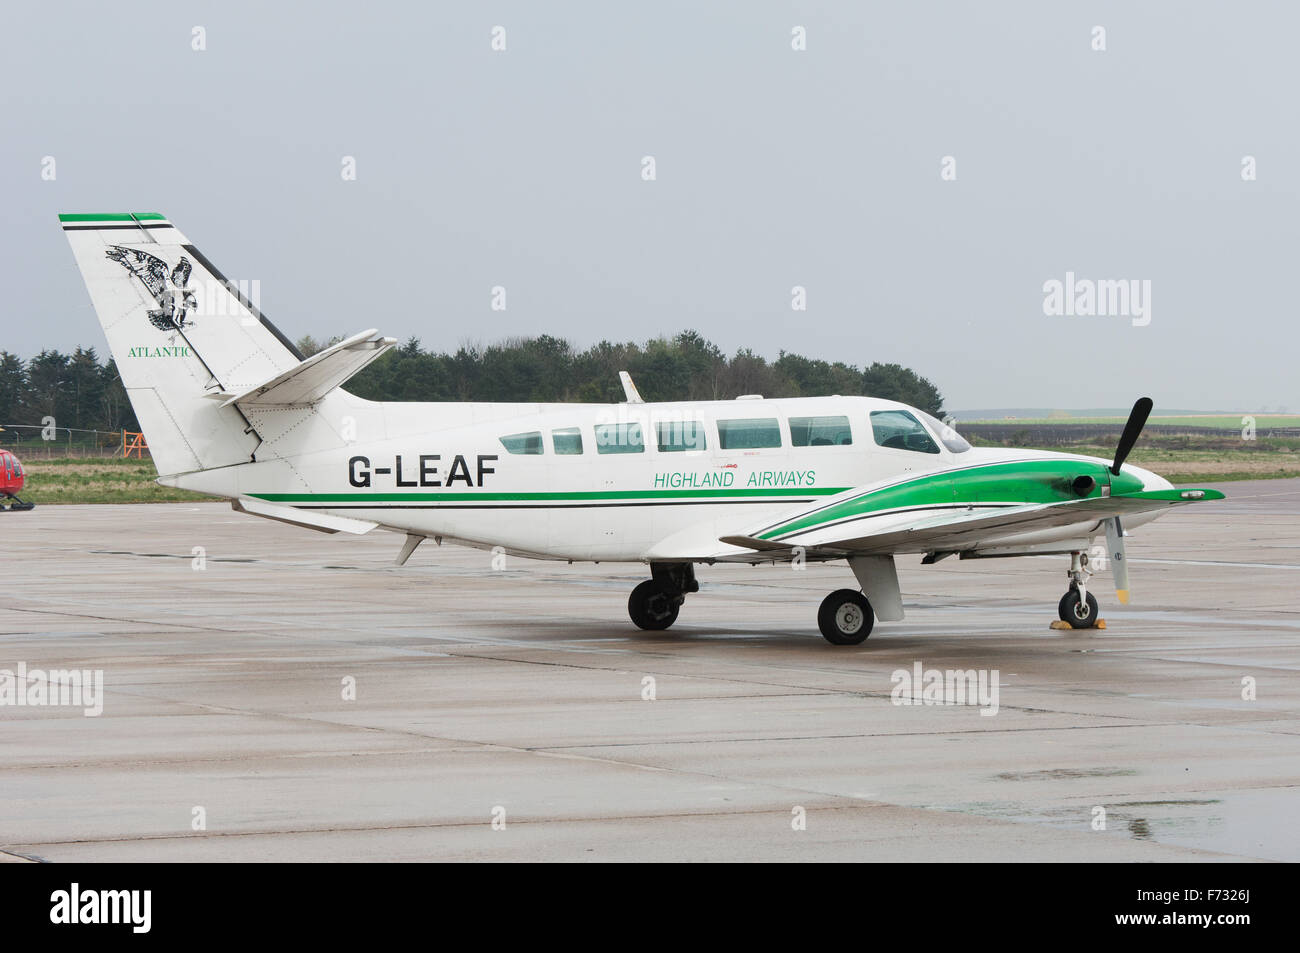 Highland Airways Cessna F406 G-LEAF at Inverness airport, Scotland. Stock Photo